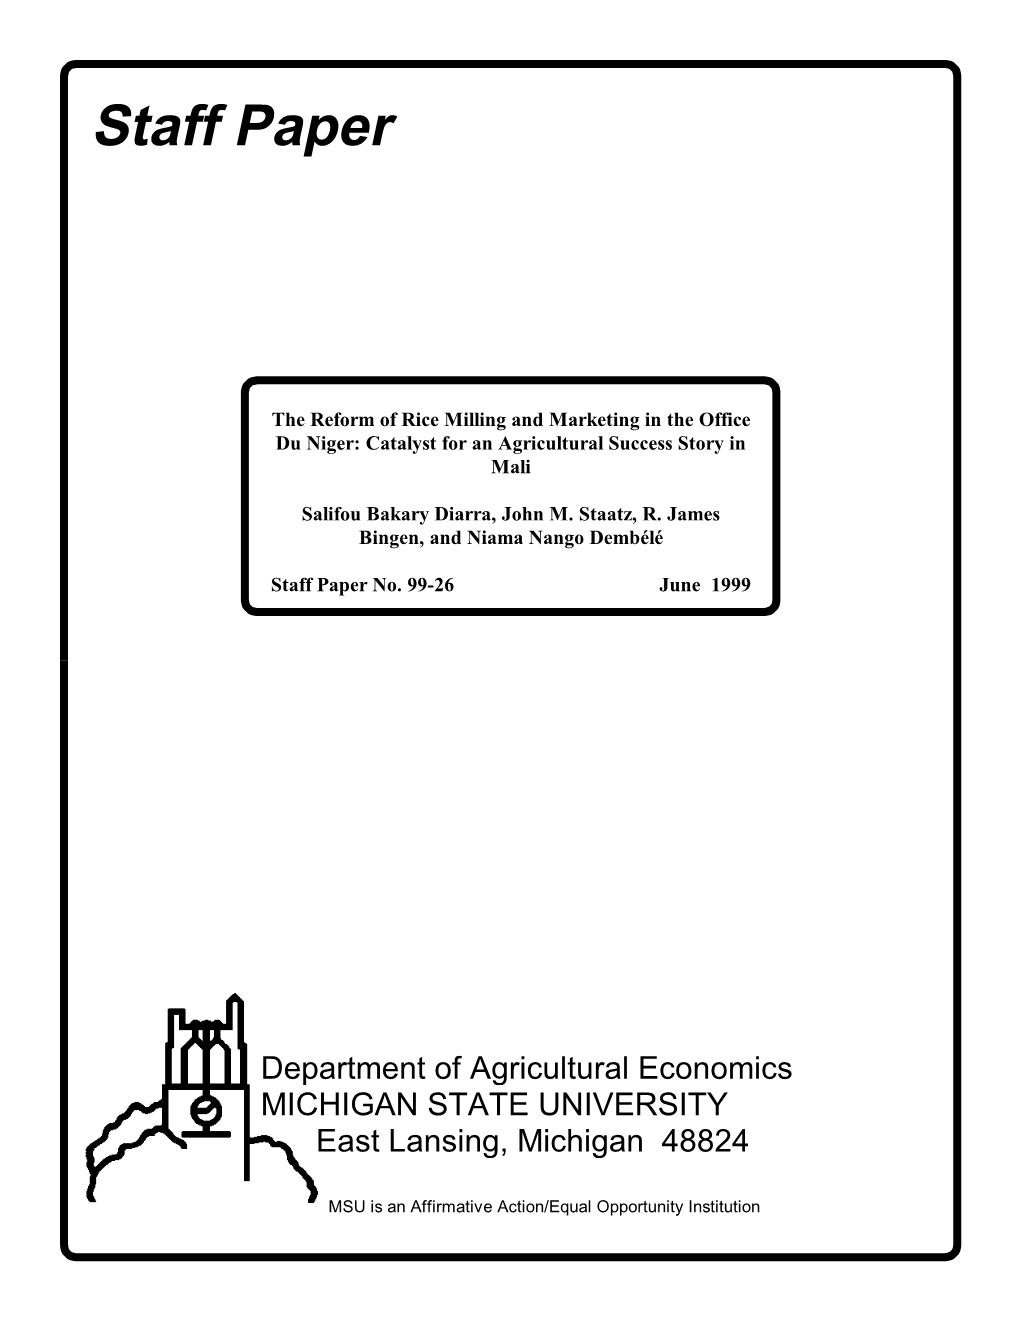 He Role of Small Rice Mills in the Rice Subsector of the Office Du Niger, Mali.” Plan B Paper, Michigan State University